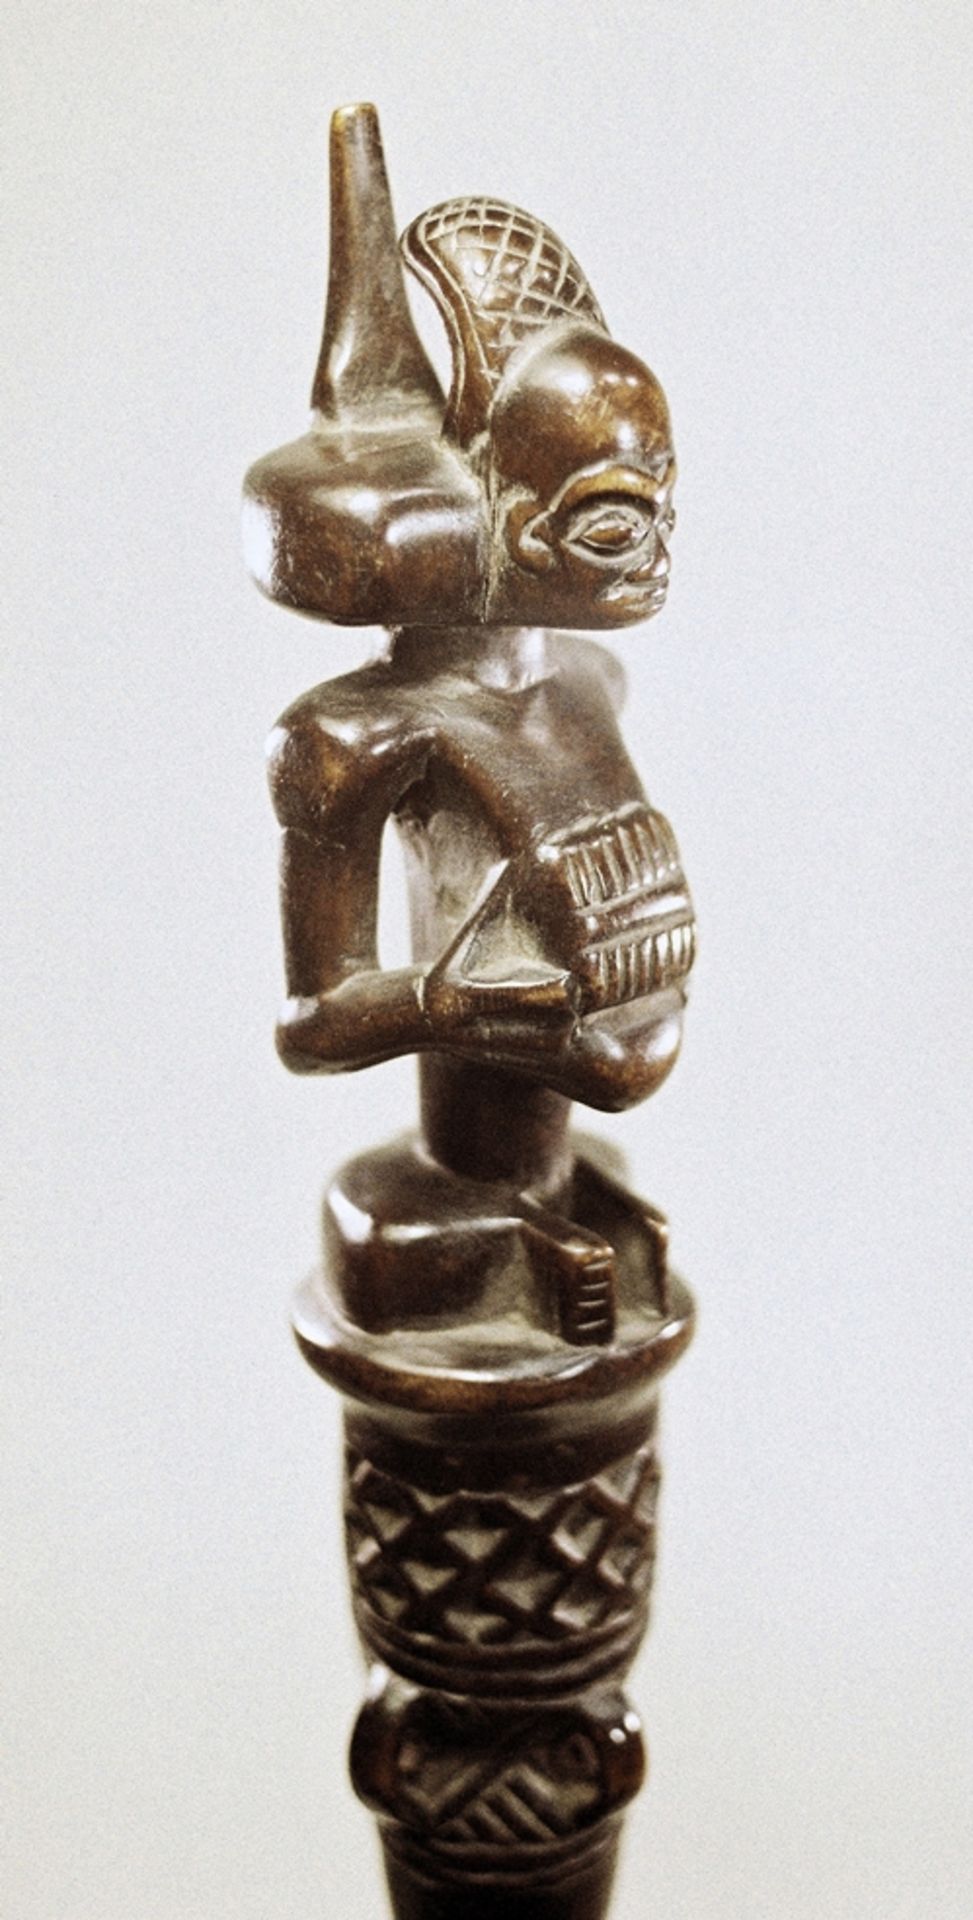 Sceptre of a notable of the Chokwe, Angola - Image 2 of 3